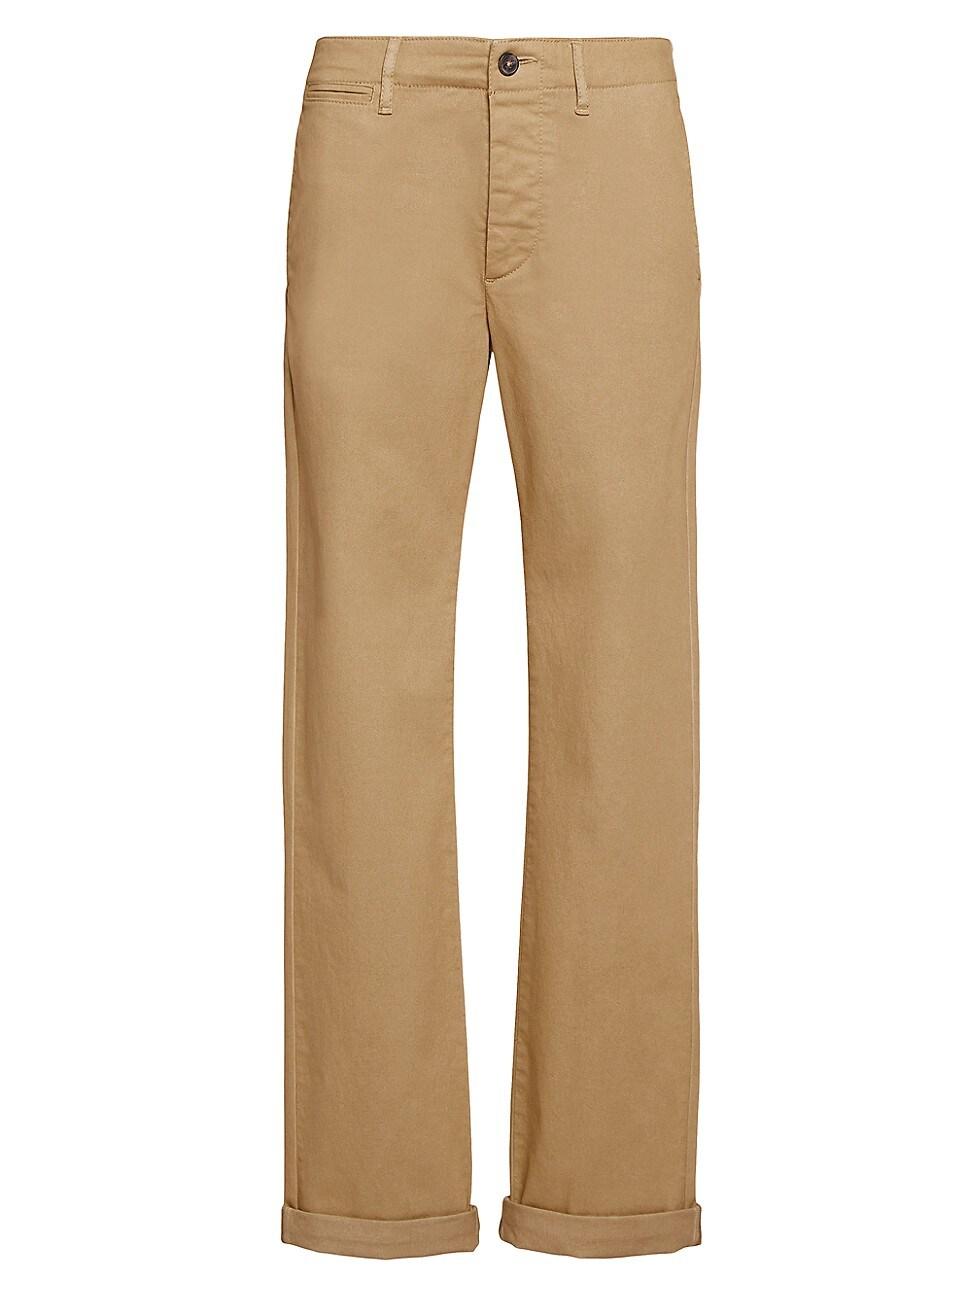 Current/Elliott The Captain Pants in Natural | Lyst